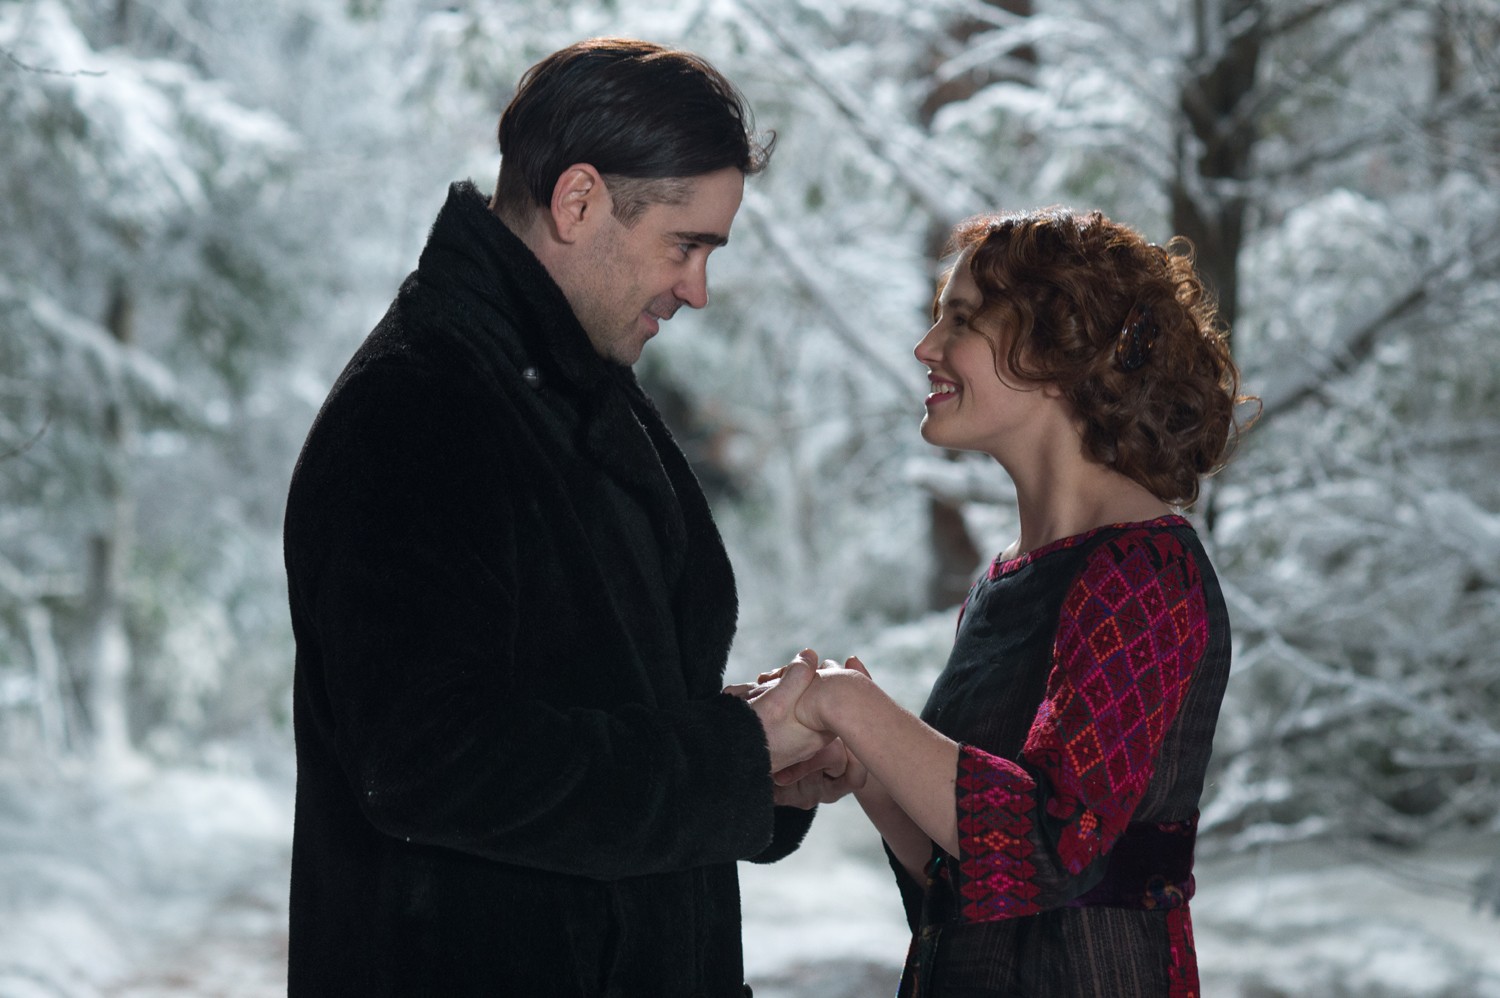 Colin Farrell stars as Peter Lake and Jessica Brown Findlay stars as Beverly Penn in Warner Bros. Pictures' Winter's Tale (2014)